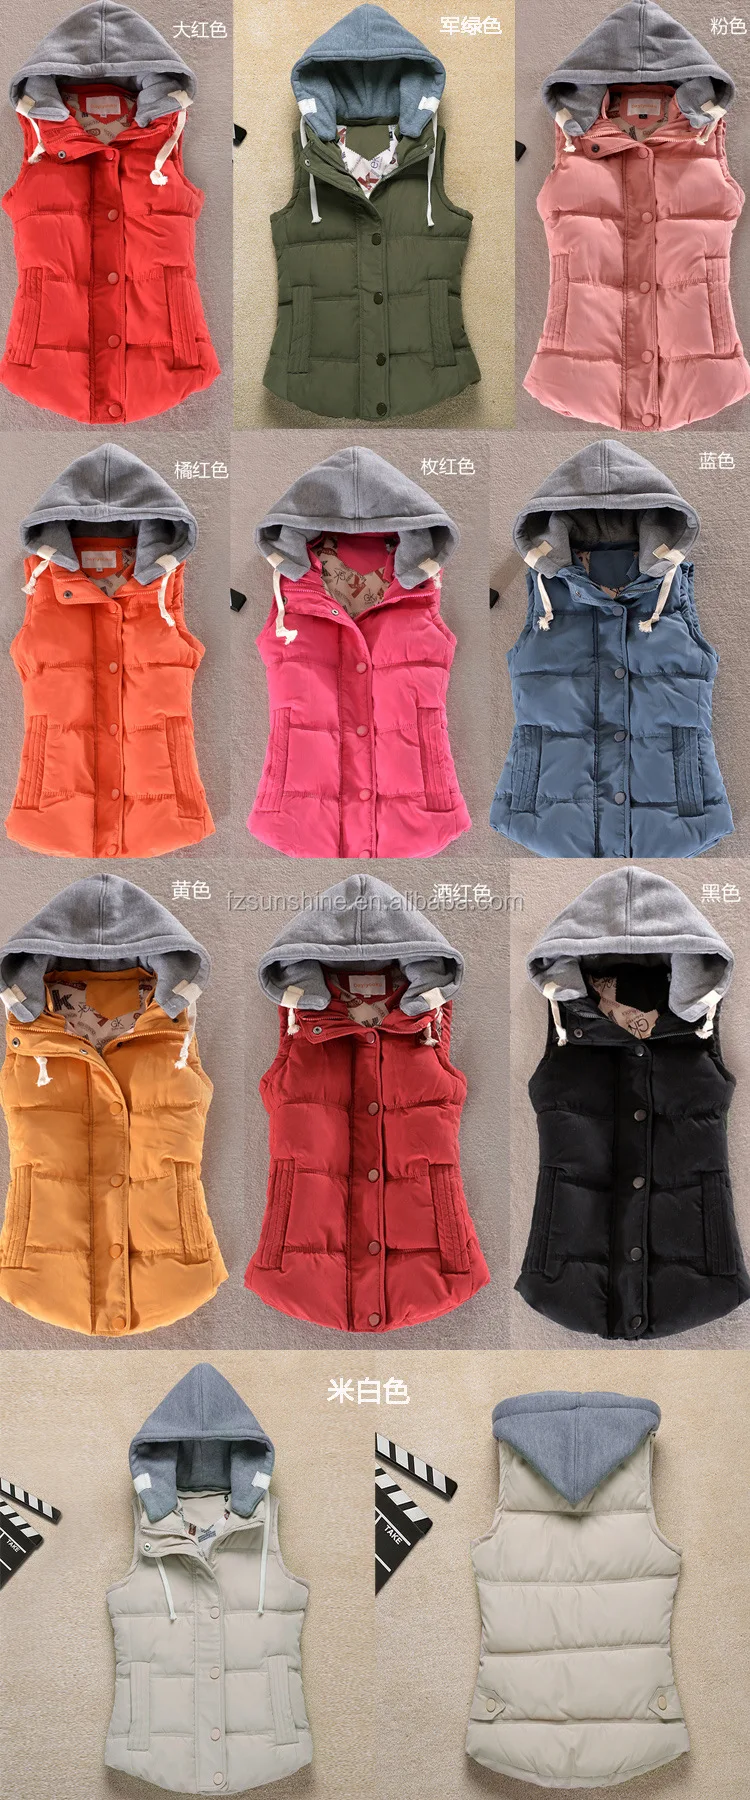 2018 Quilted Girls Ladies Red Vests With Hood - Buy Red Vests,Girls ...